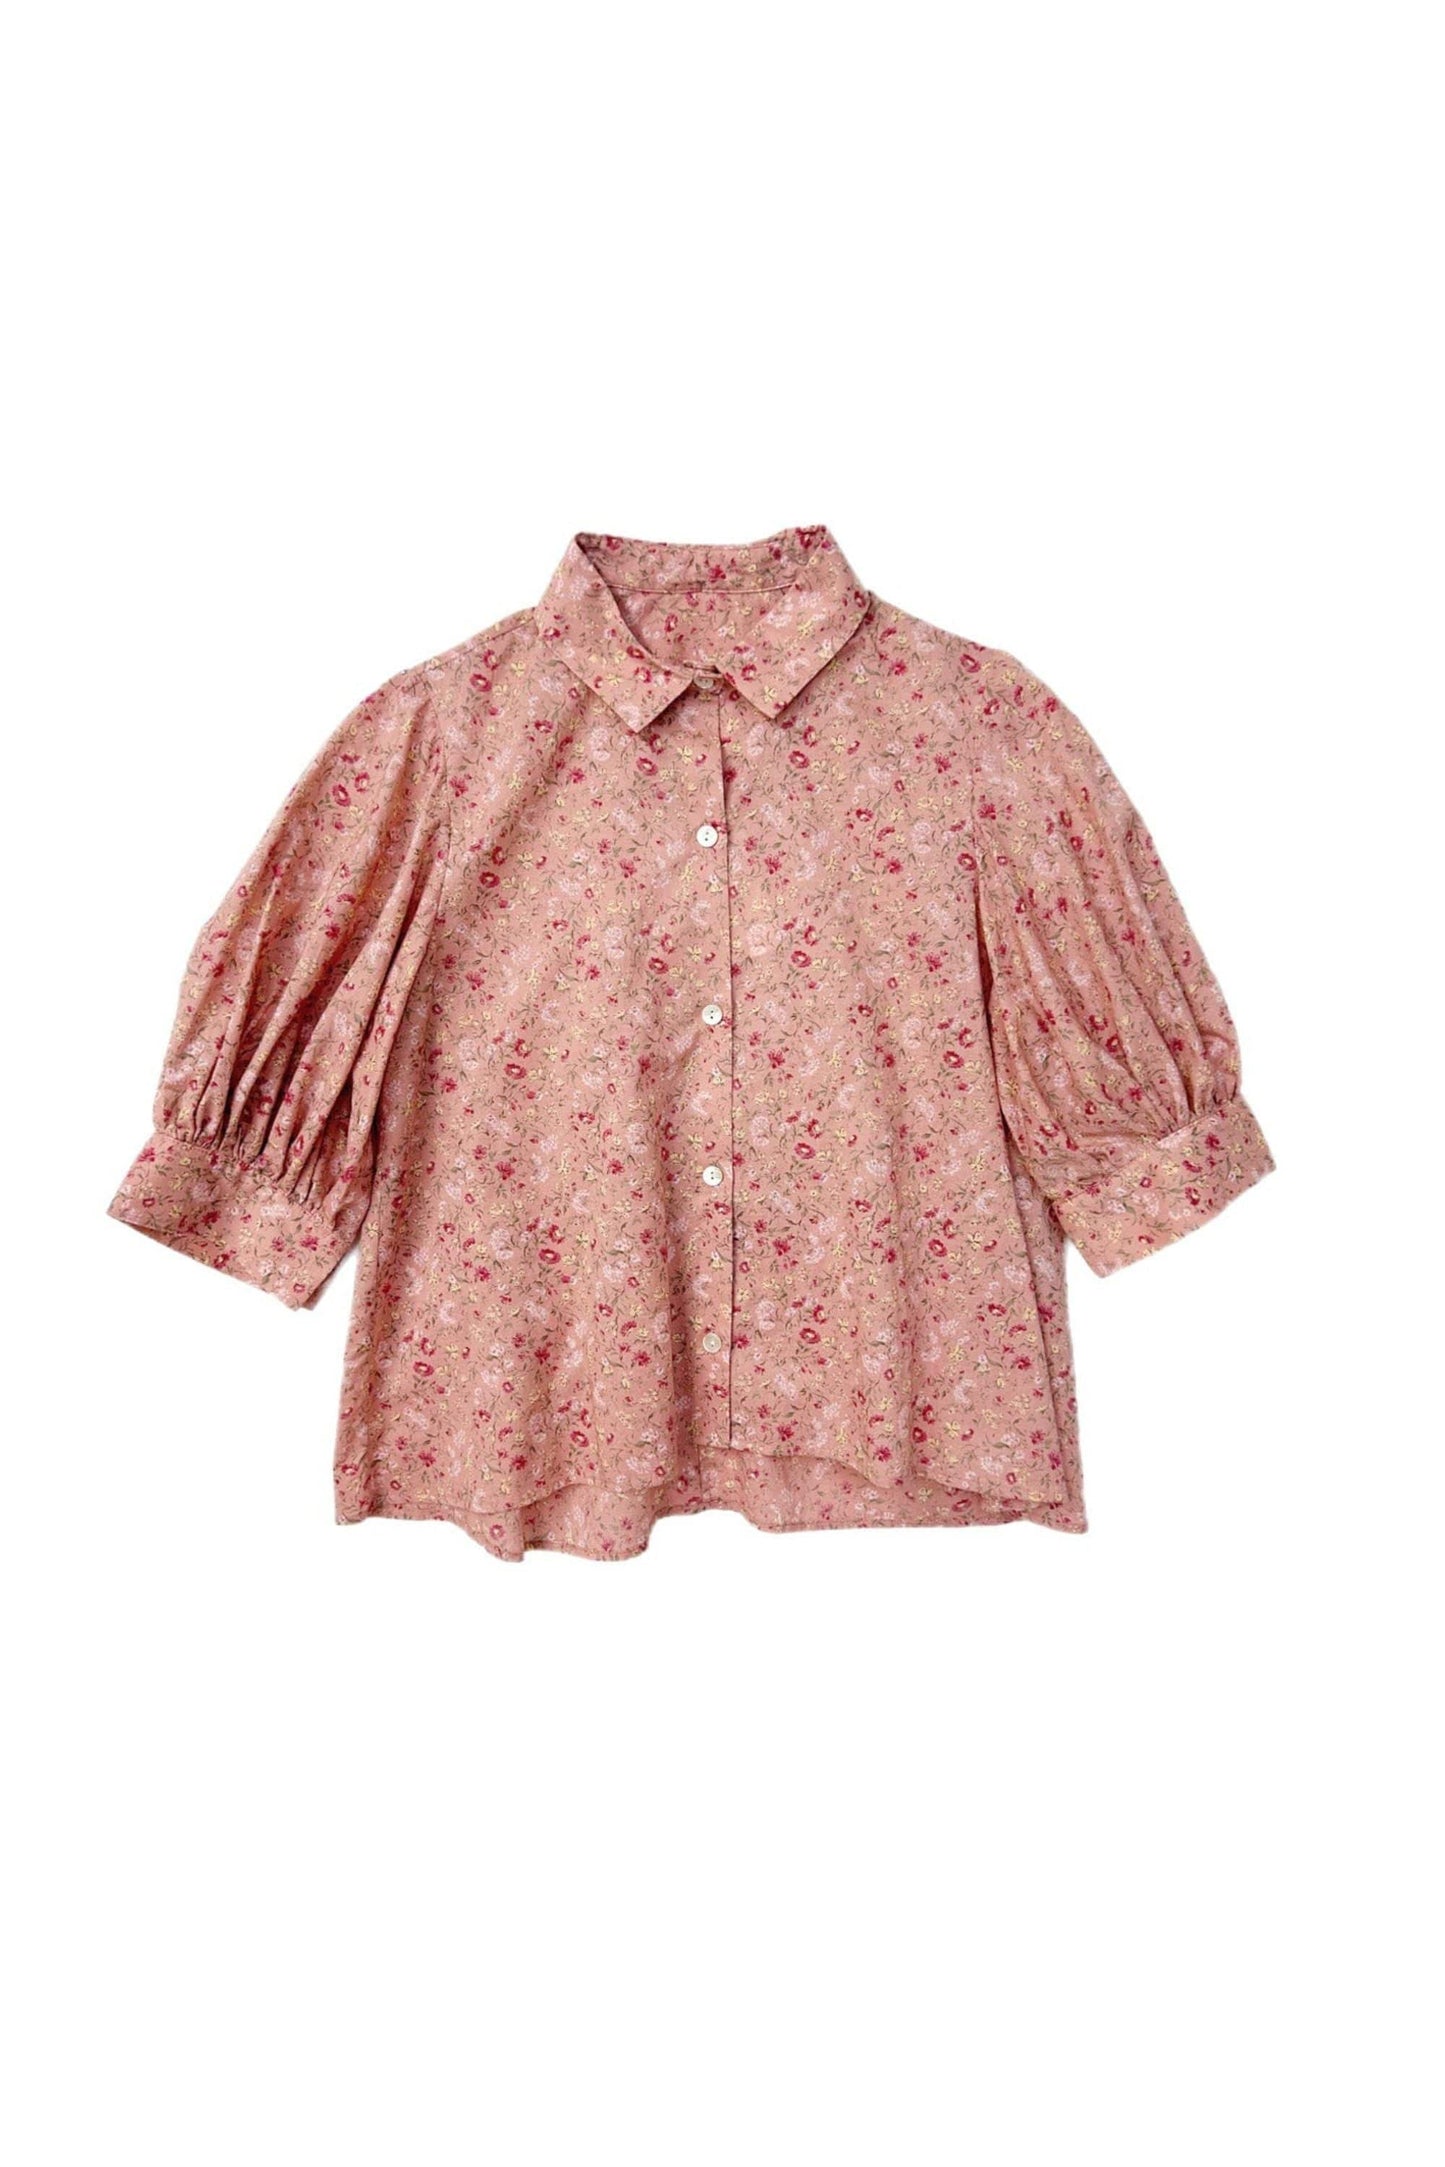 Sylvia Blouse in Cotton Floral Blouses CHRISTINE ALCALAY Petal Floral Extra Small 